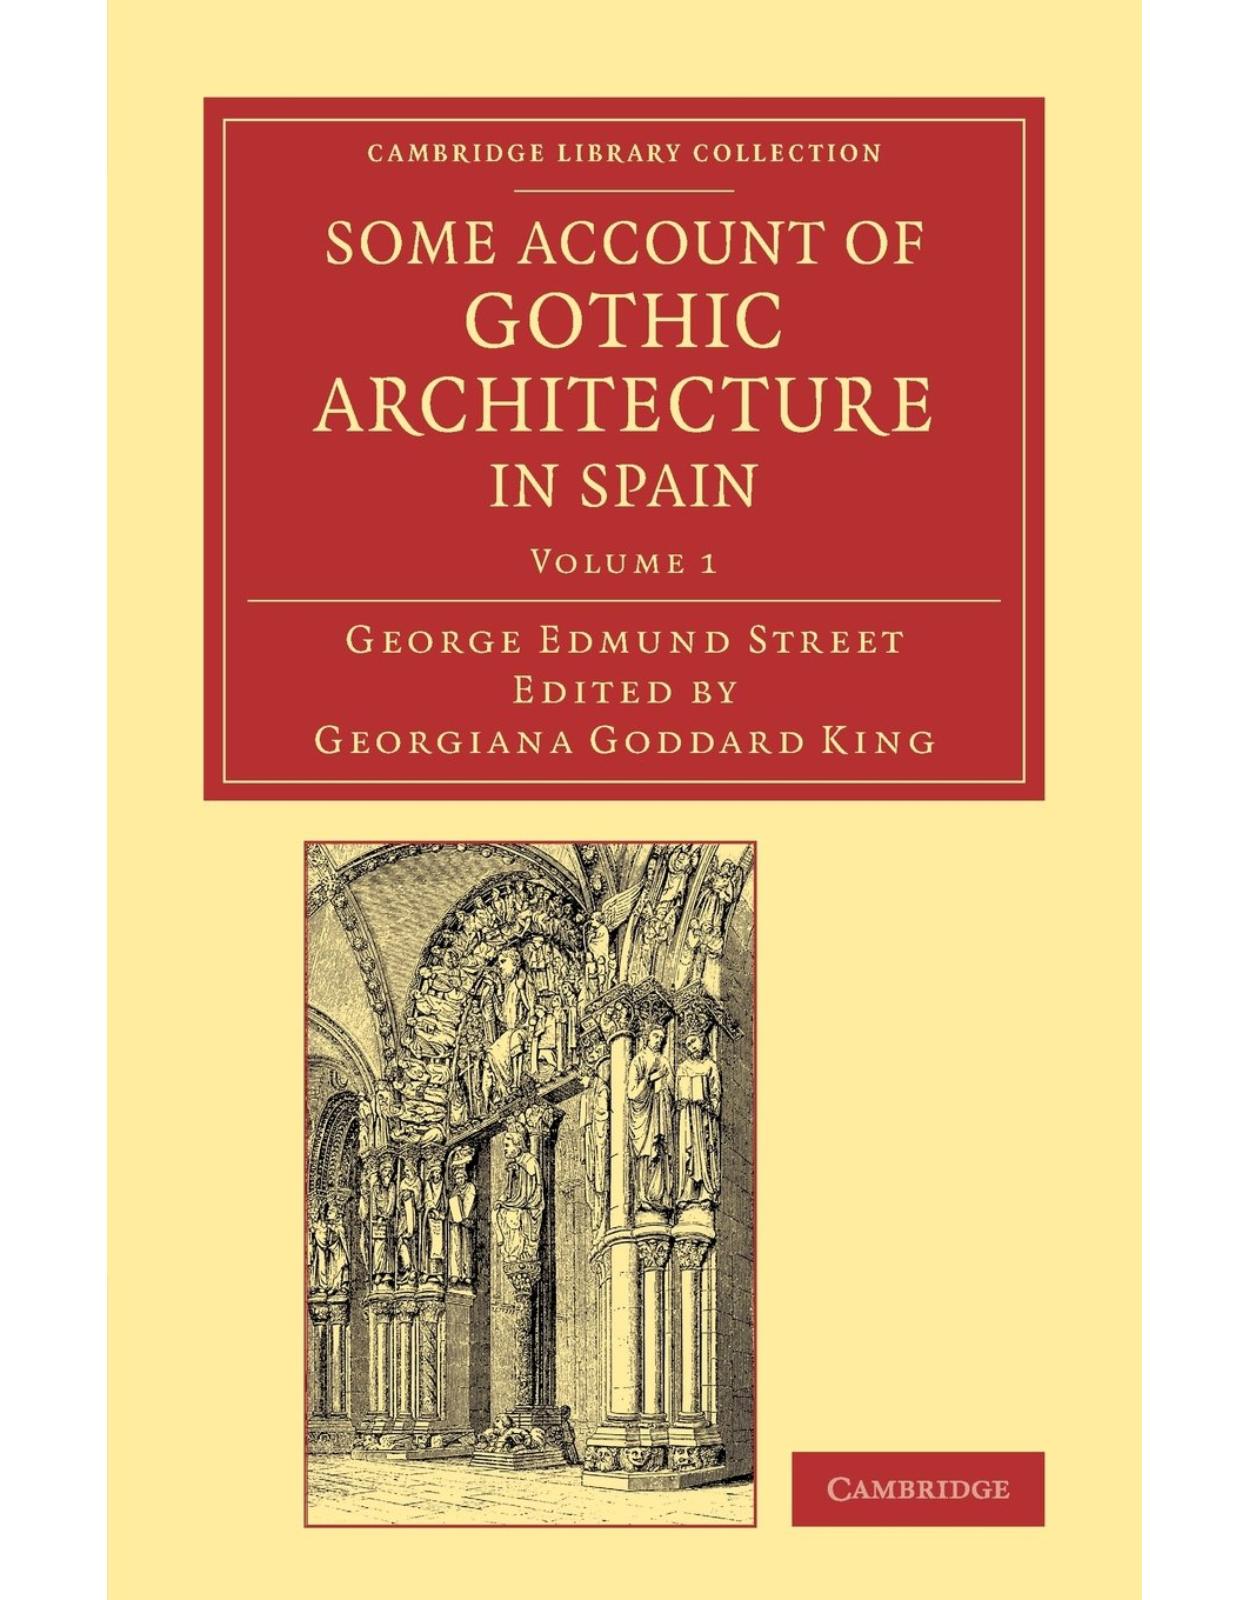 Some Account of Gothic Architecture in Spain: Volume 1 (Cambridge Library Collection - Art and Architecture)